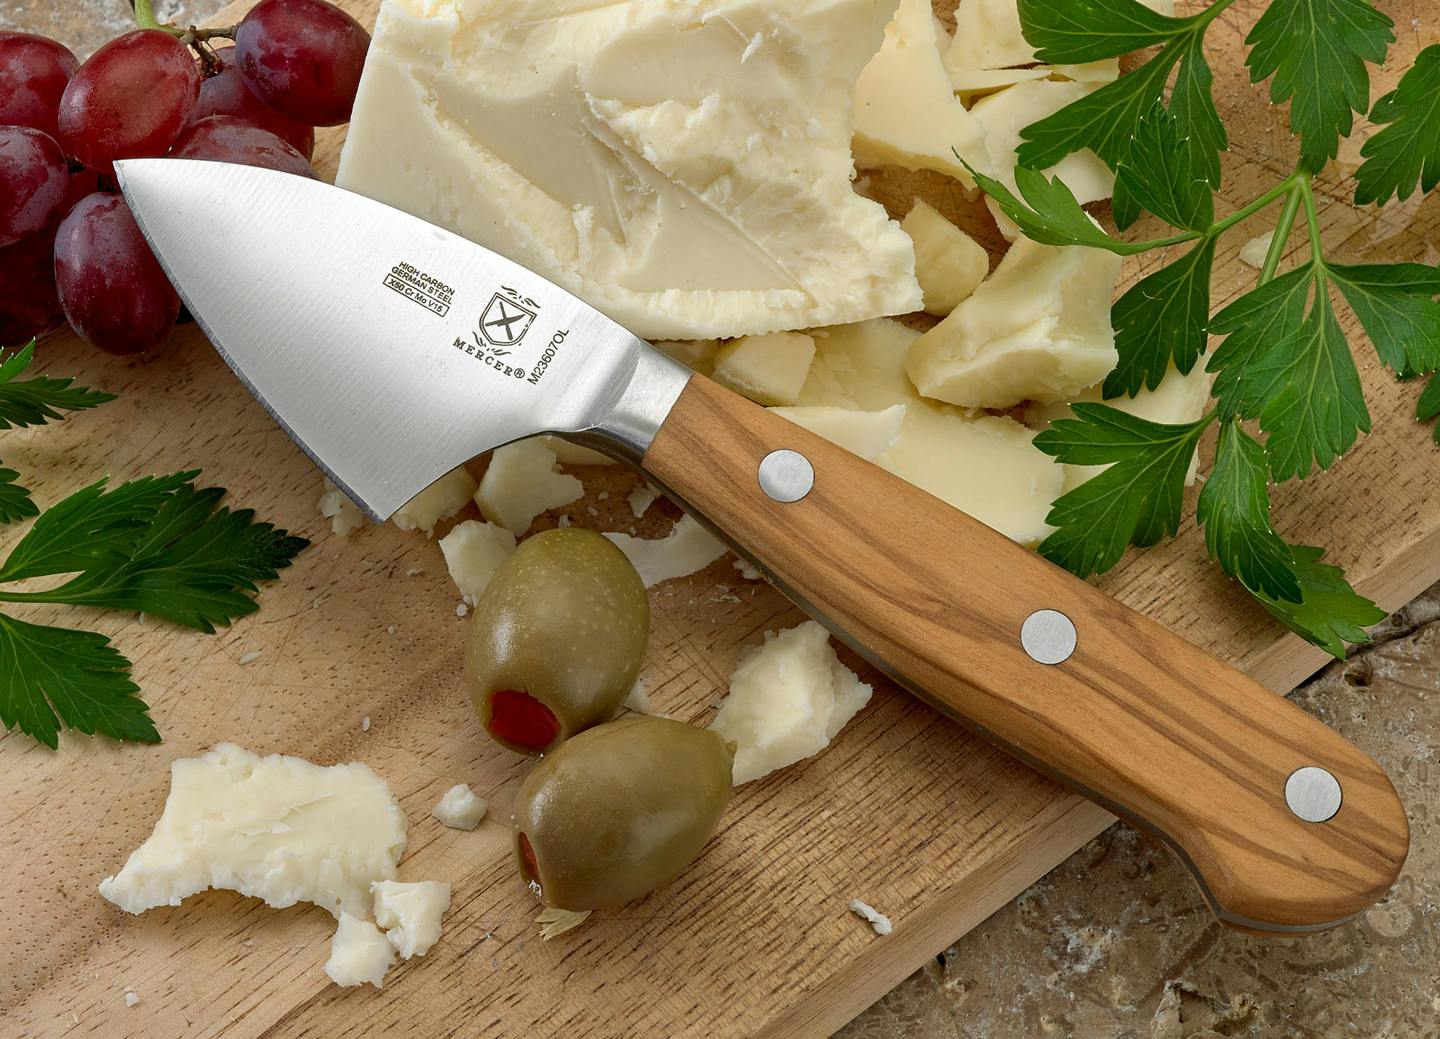 Wusthof Classic Parmesan Cheese Knife - 2.75